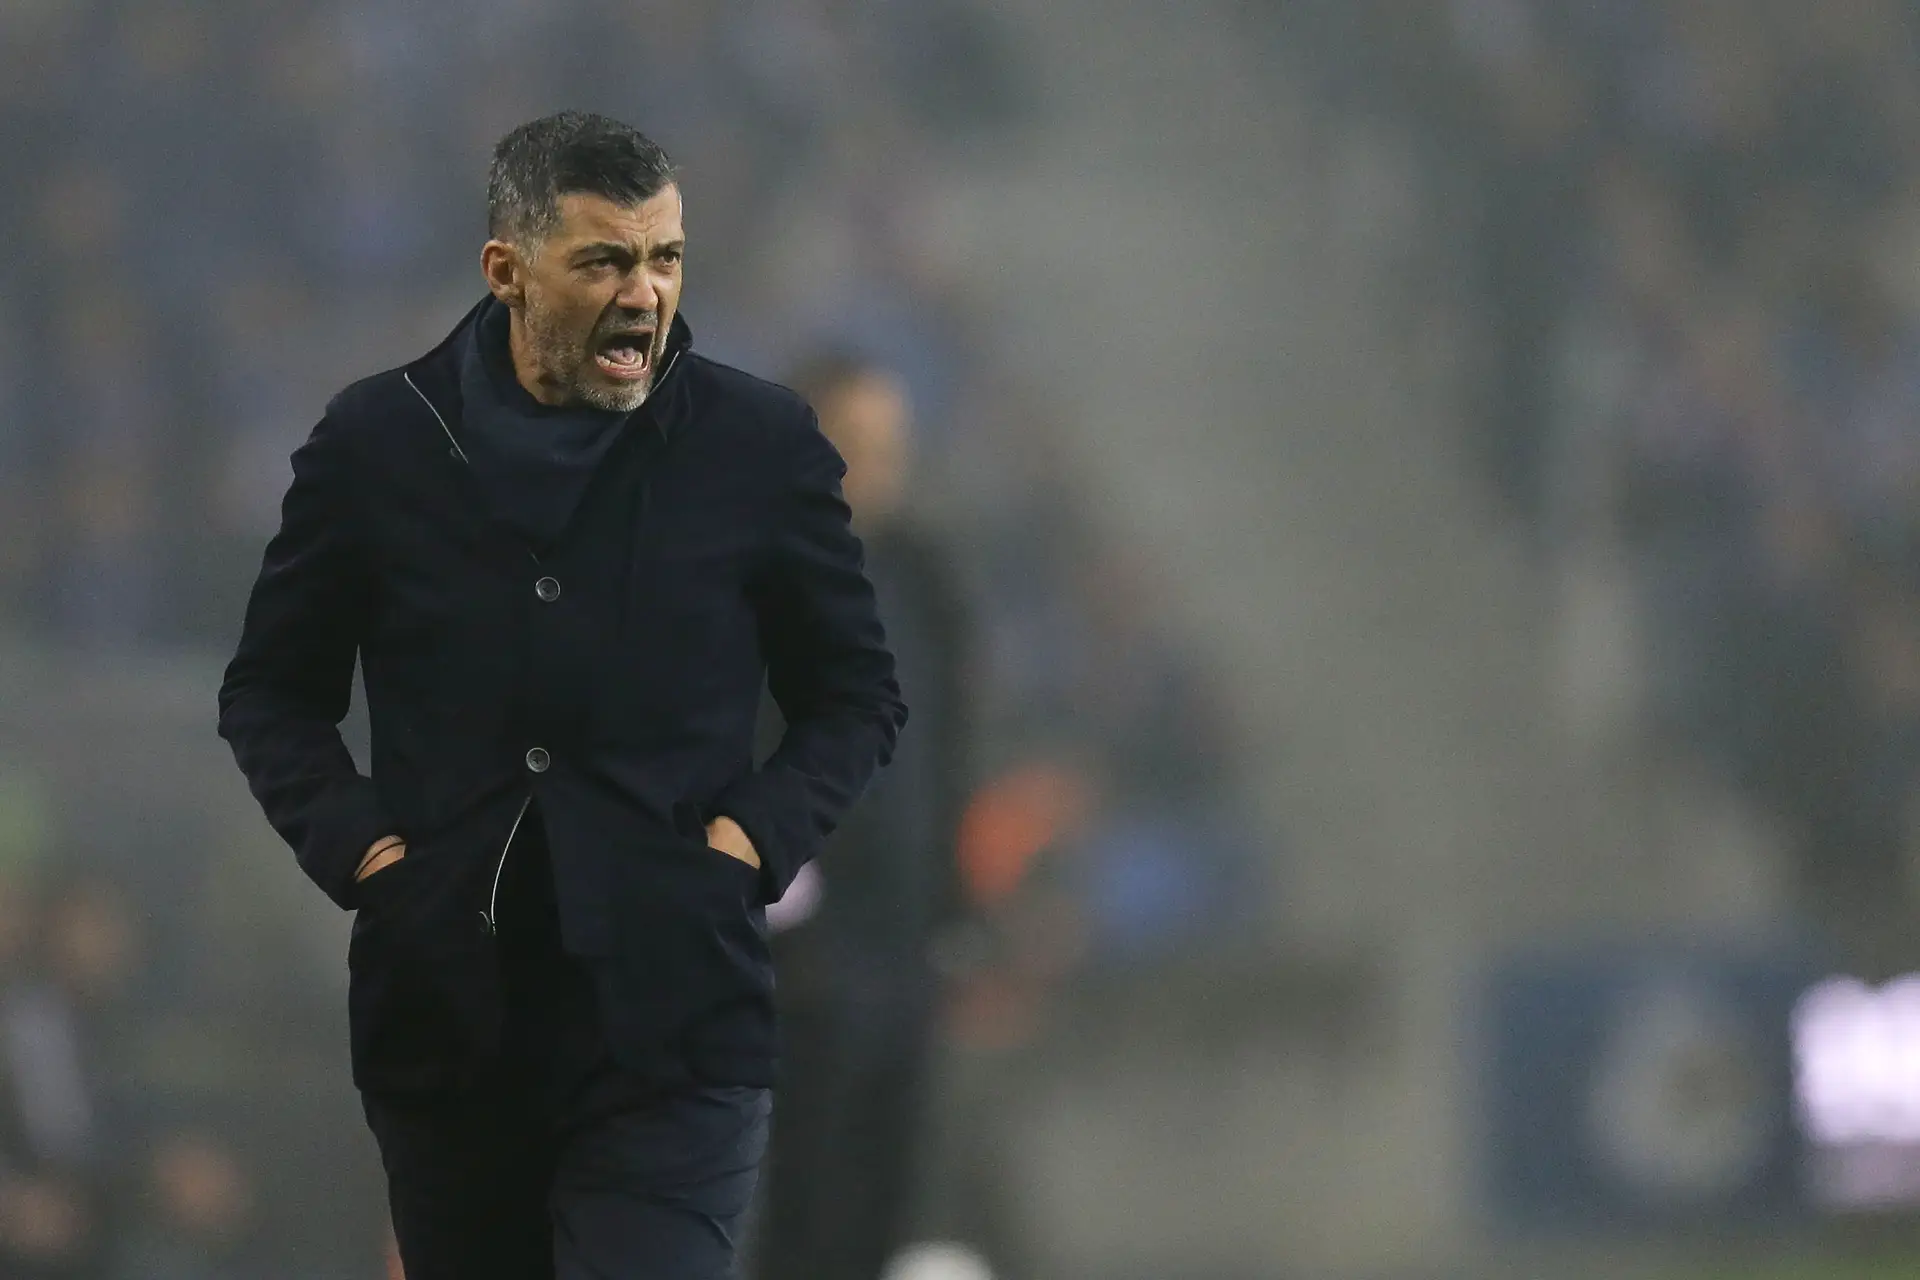 Sergio Conceicao: Porto is “close to perfection” but victory has a “bitter taste”